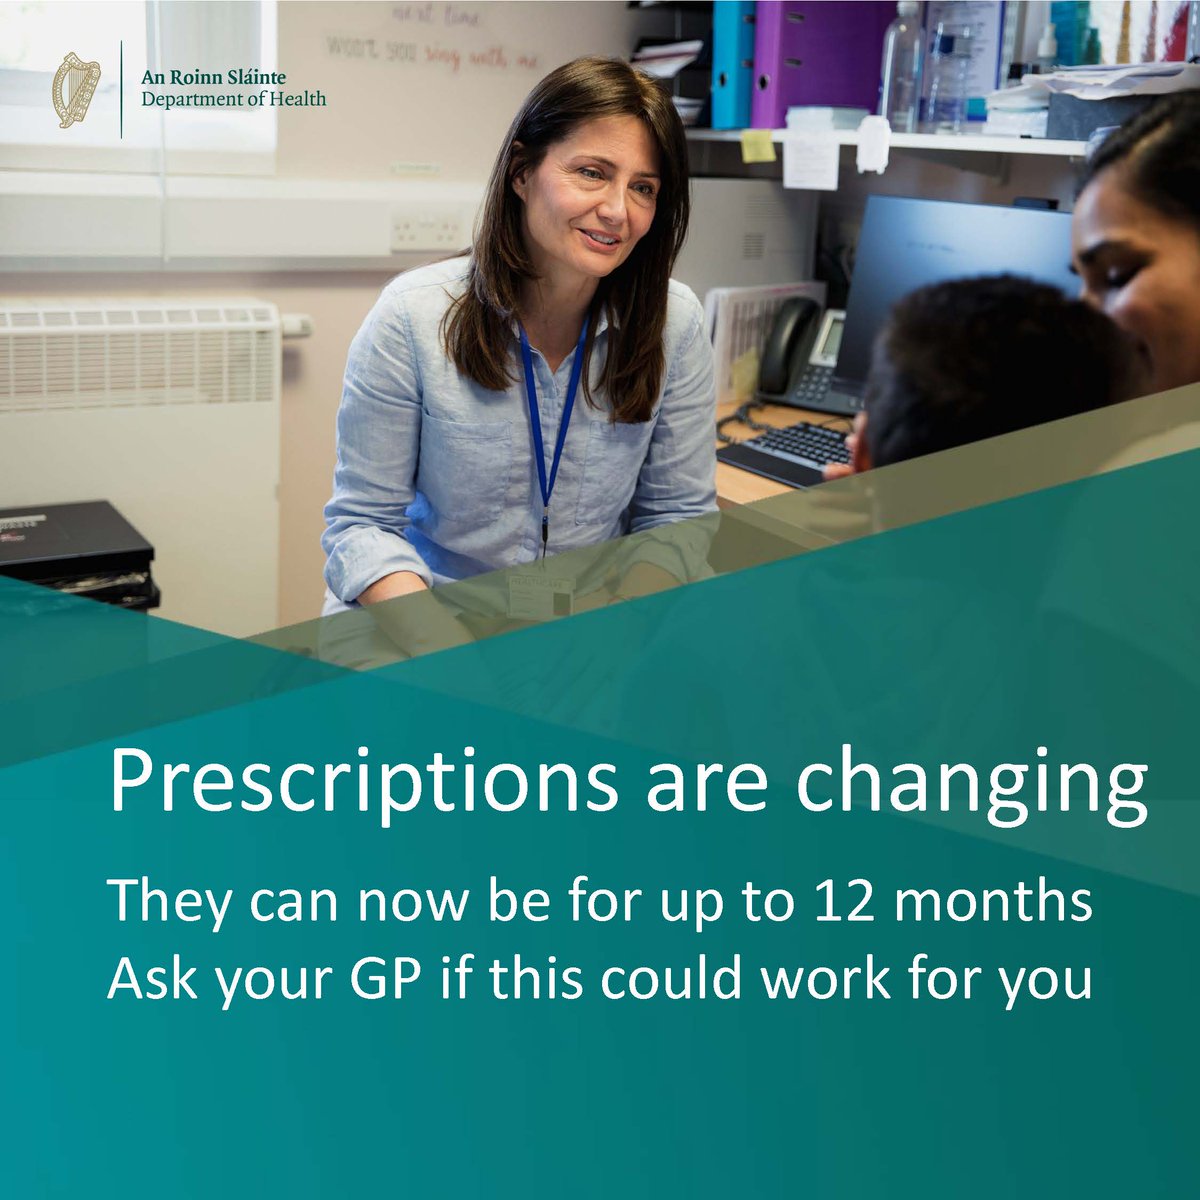 From 1 Mar, prescriptions can be for up to 12 months. If you’re on medication long term, ask your GP if a 12 month prescription could work for you. Find out more at gov.ie/12monthprescri…